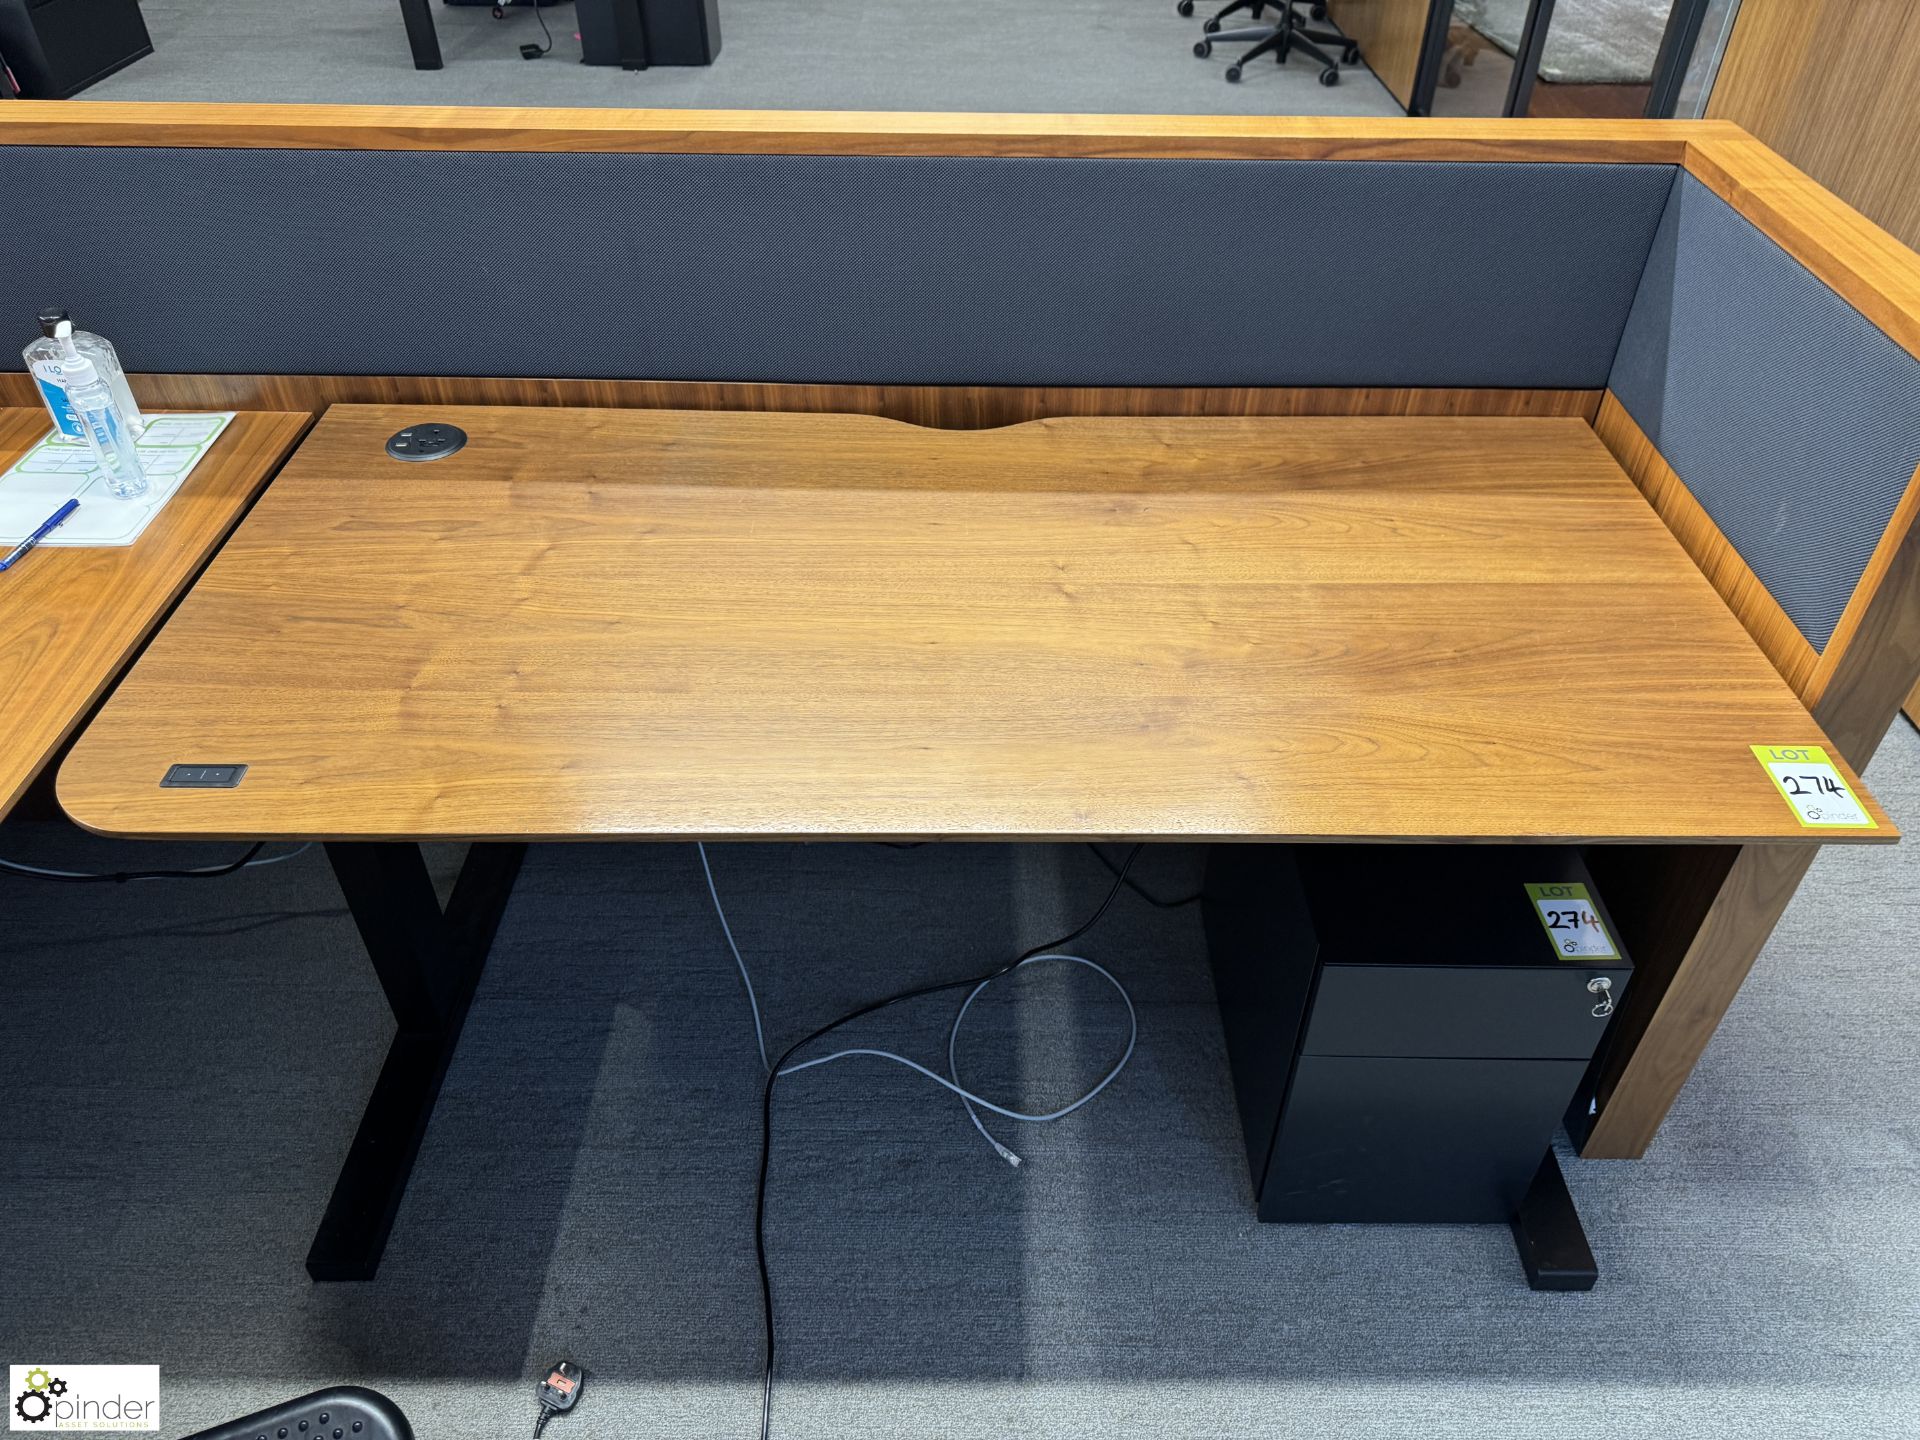 OMT powered rise and fall Desk, cherry veneer finish, 1600mm x 775mm, with steel 2-drawer - Image 2 of 6